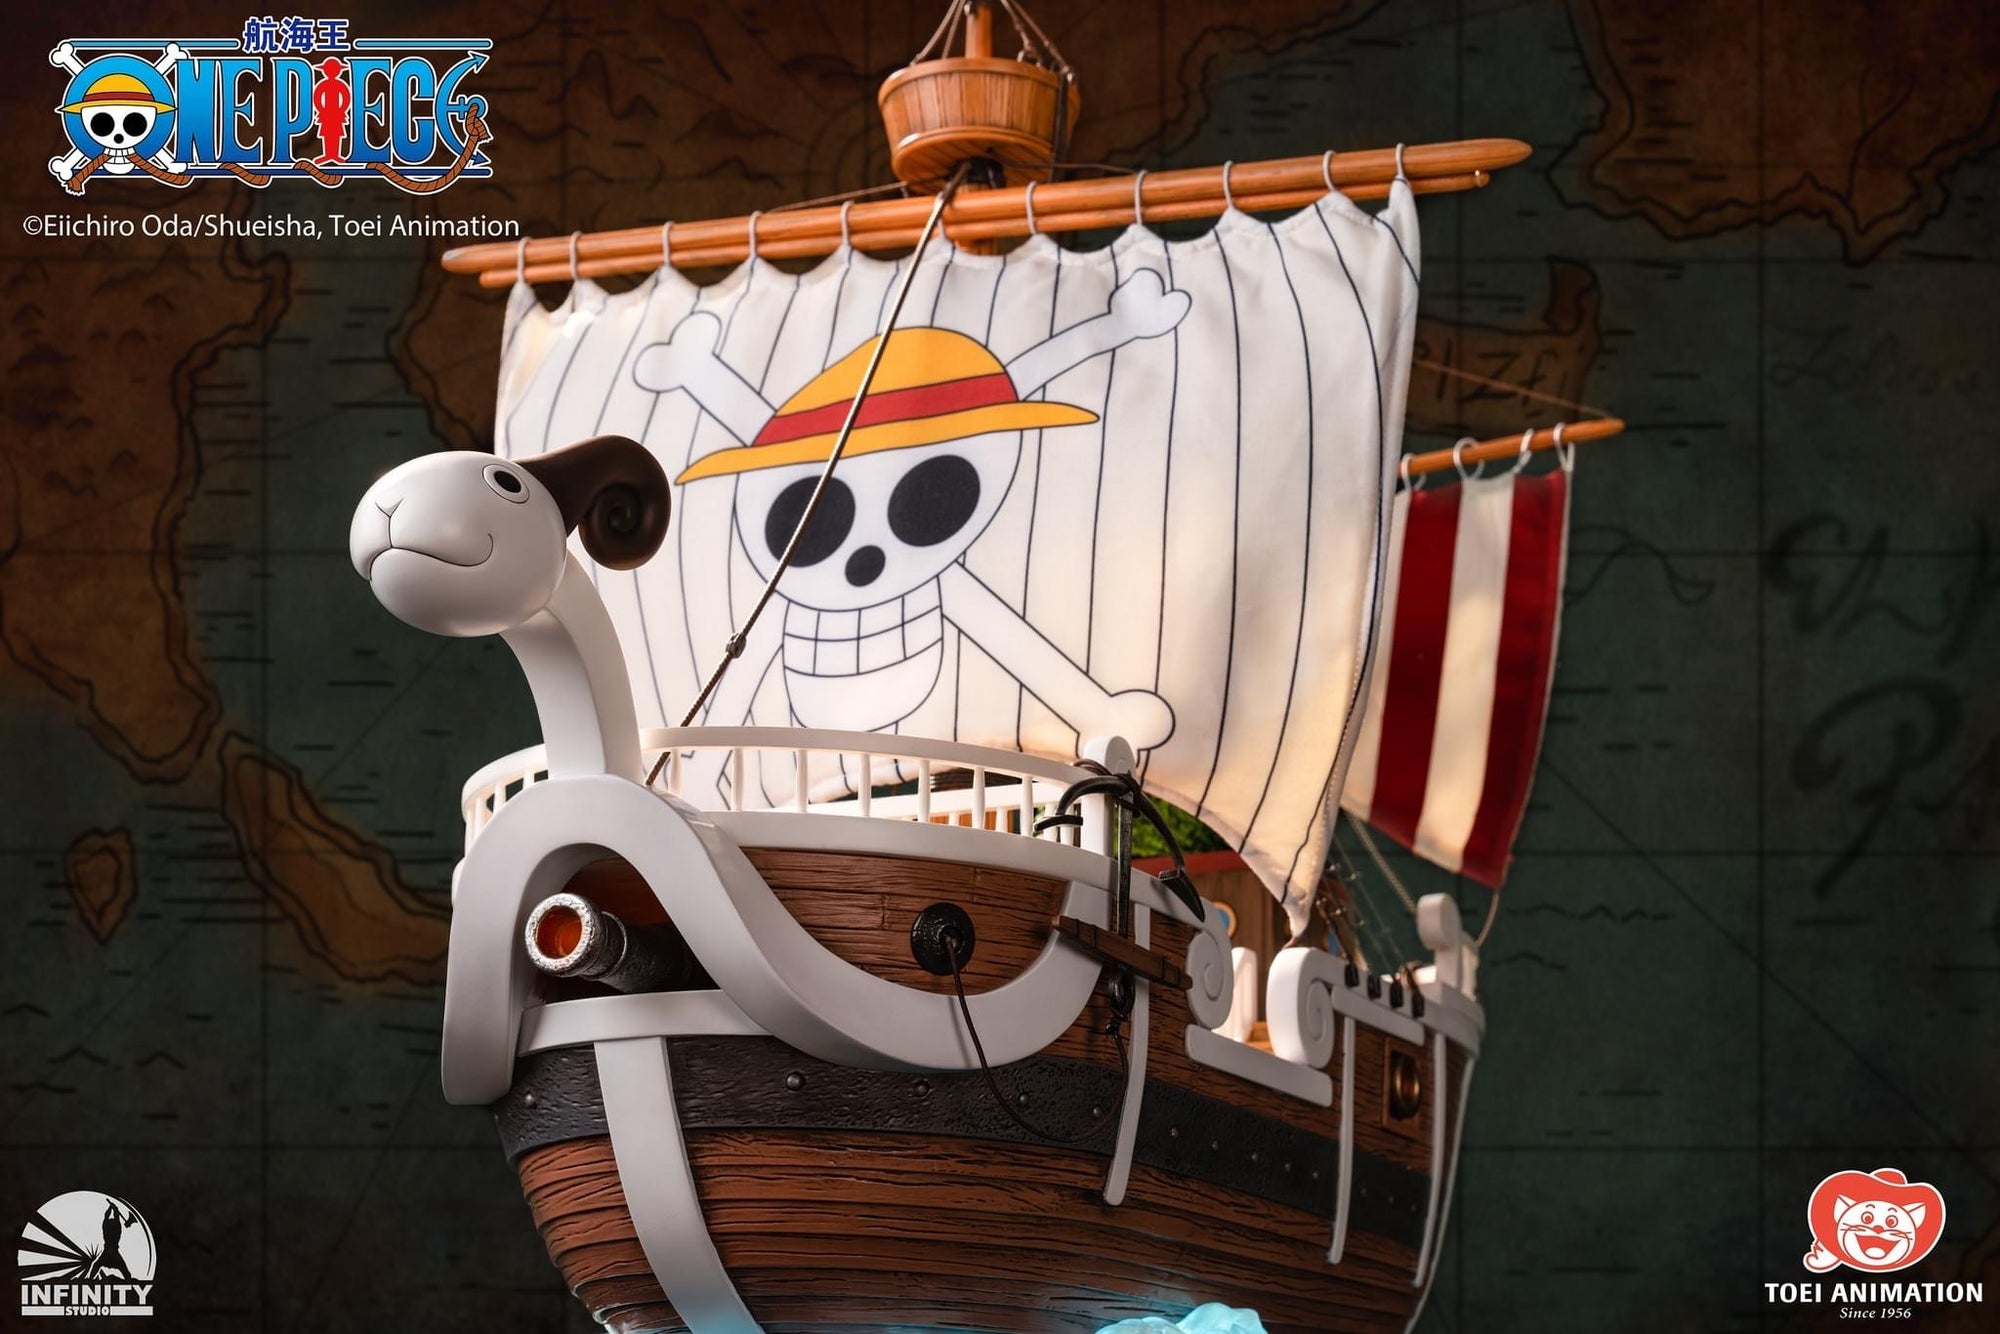 One Piece Going Merry (One Piece) Sunny (One Piece) Thousand Sunny